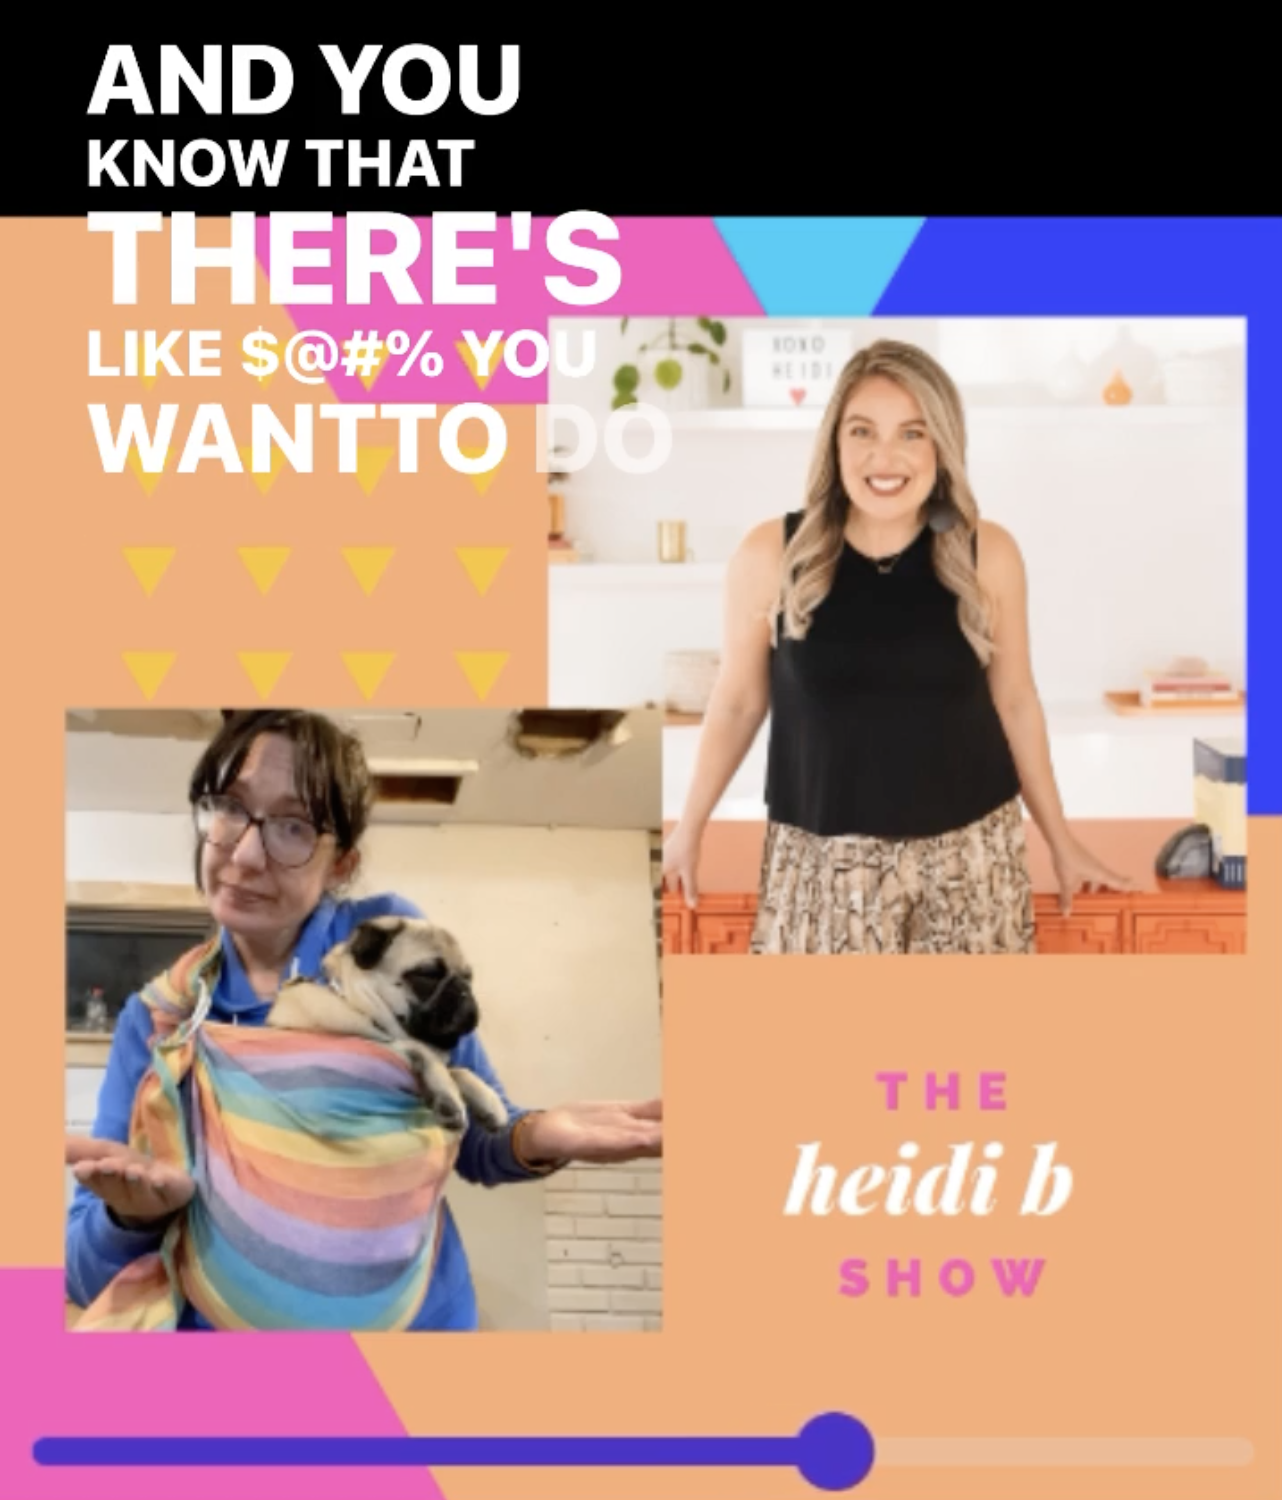 New Interview: Giving Fewer Fucks, on the Heidi B Show